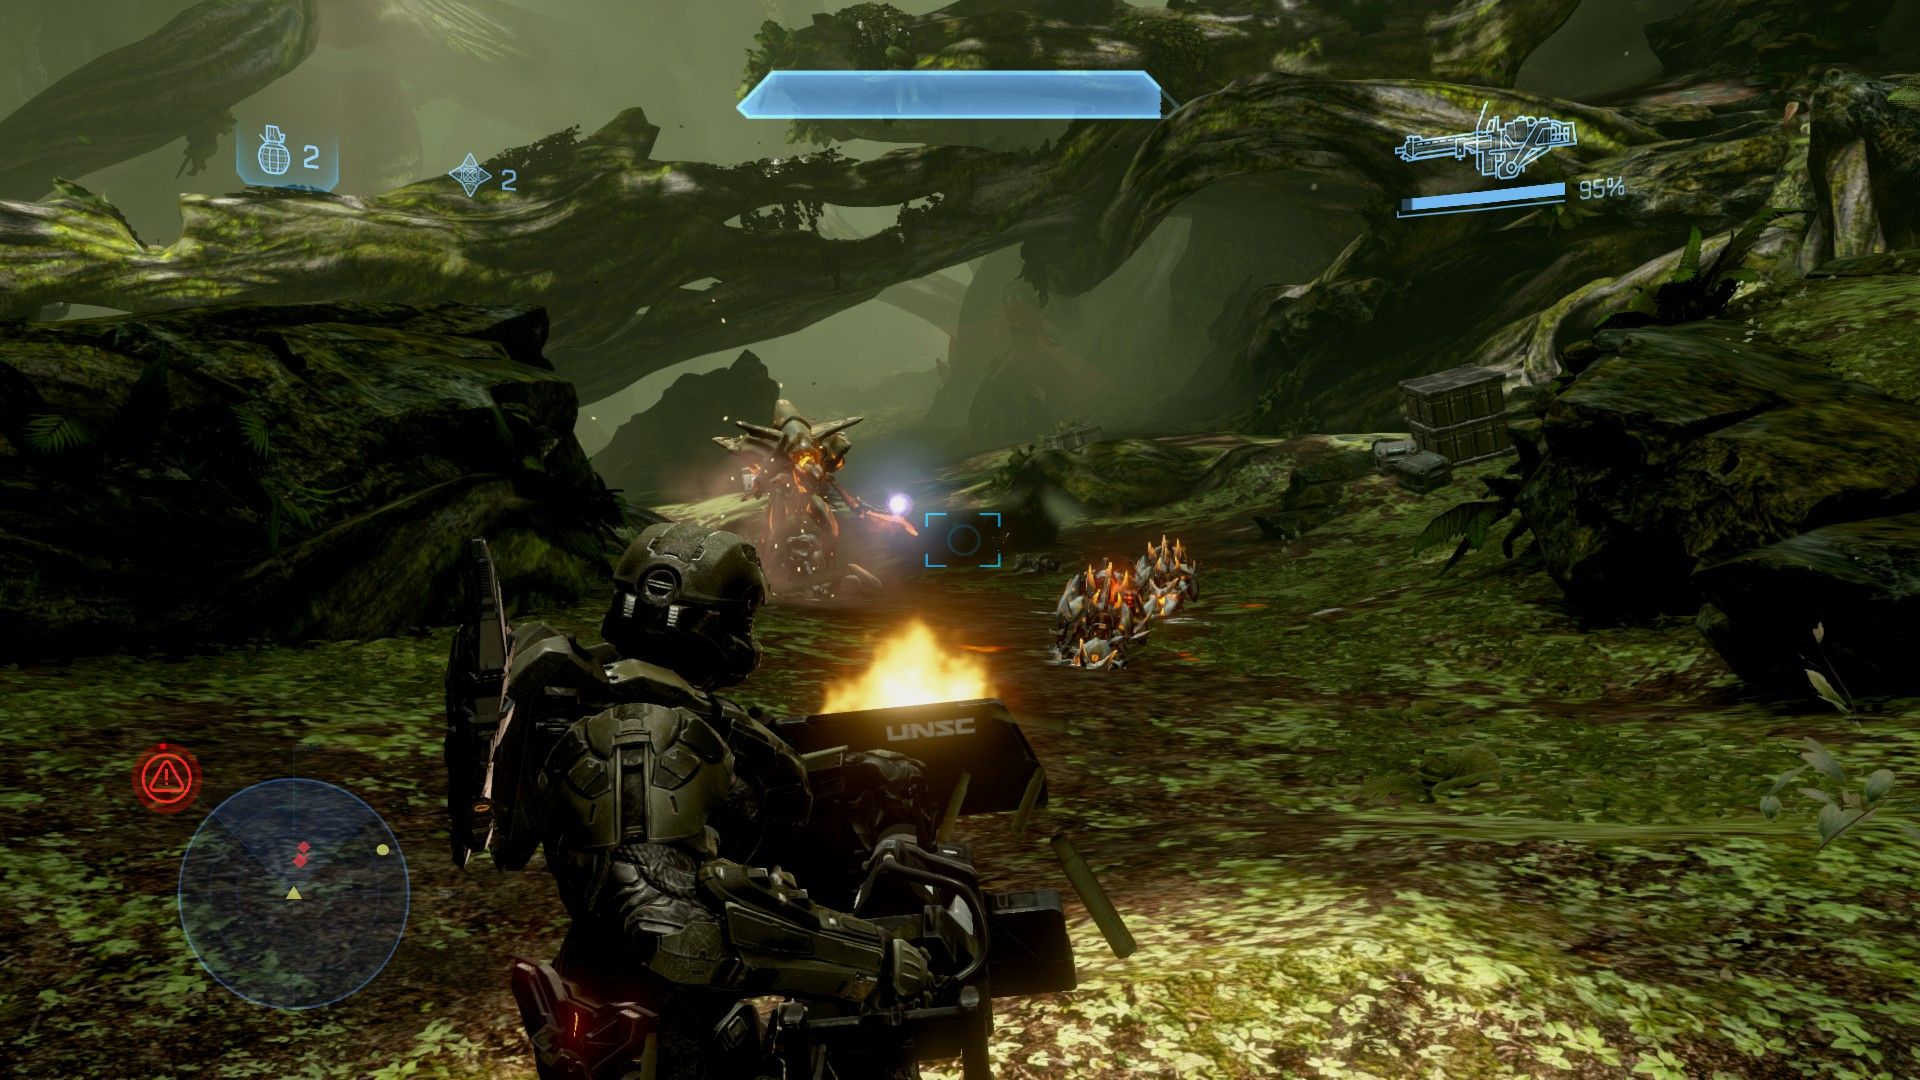 Halo 4 PC Review A NearPerfect Ending